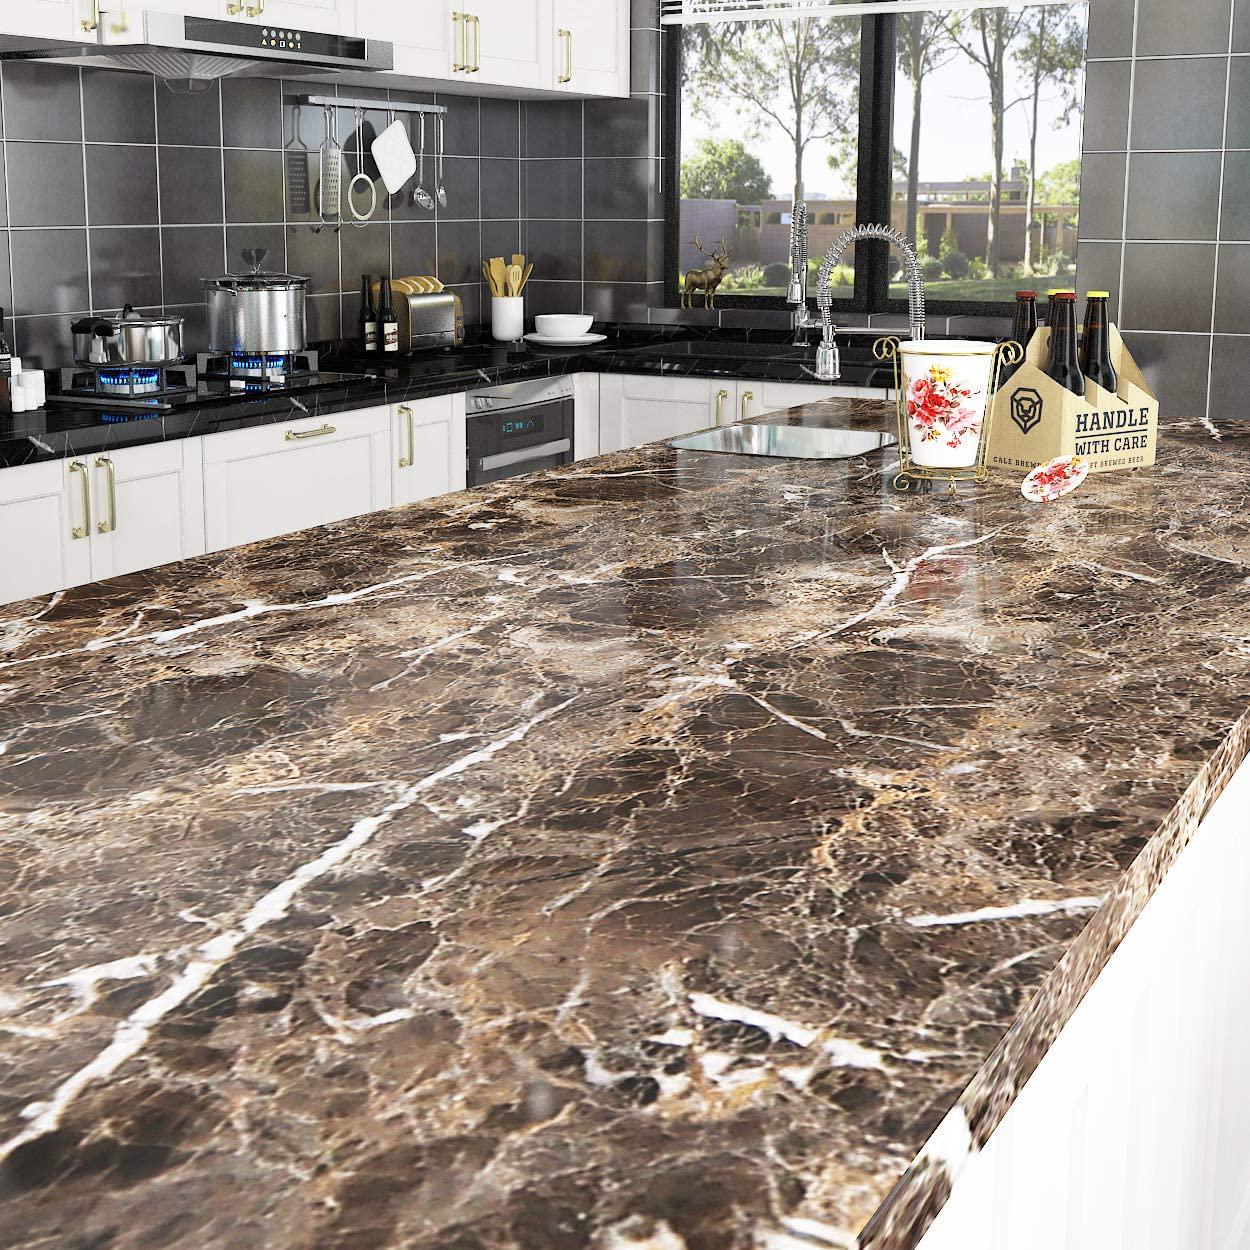 Livelynine, Livelynine 197 X 24 Inch Wide Countertop Contact Paper Brown Marble Wallpaper for Kitchen Countertop Peel and Stick Wallpaper for Bathroom Furniture Granite Countertop Paper Table Desk Cover